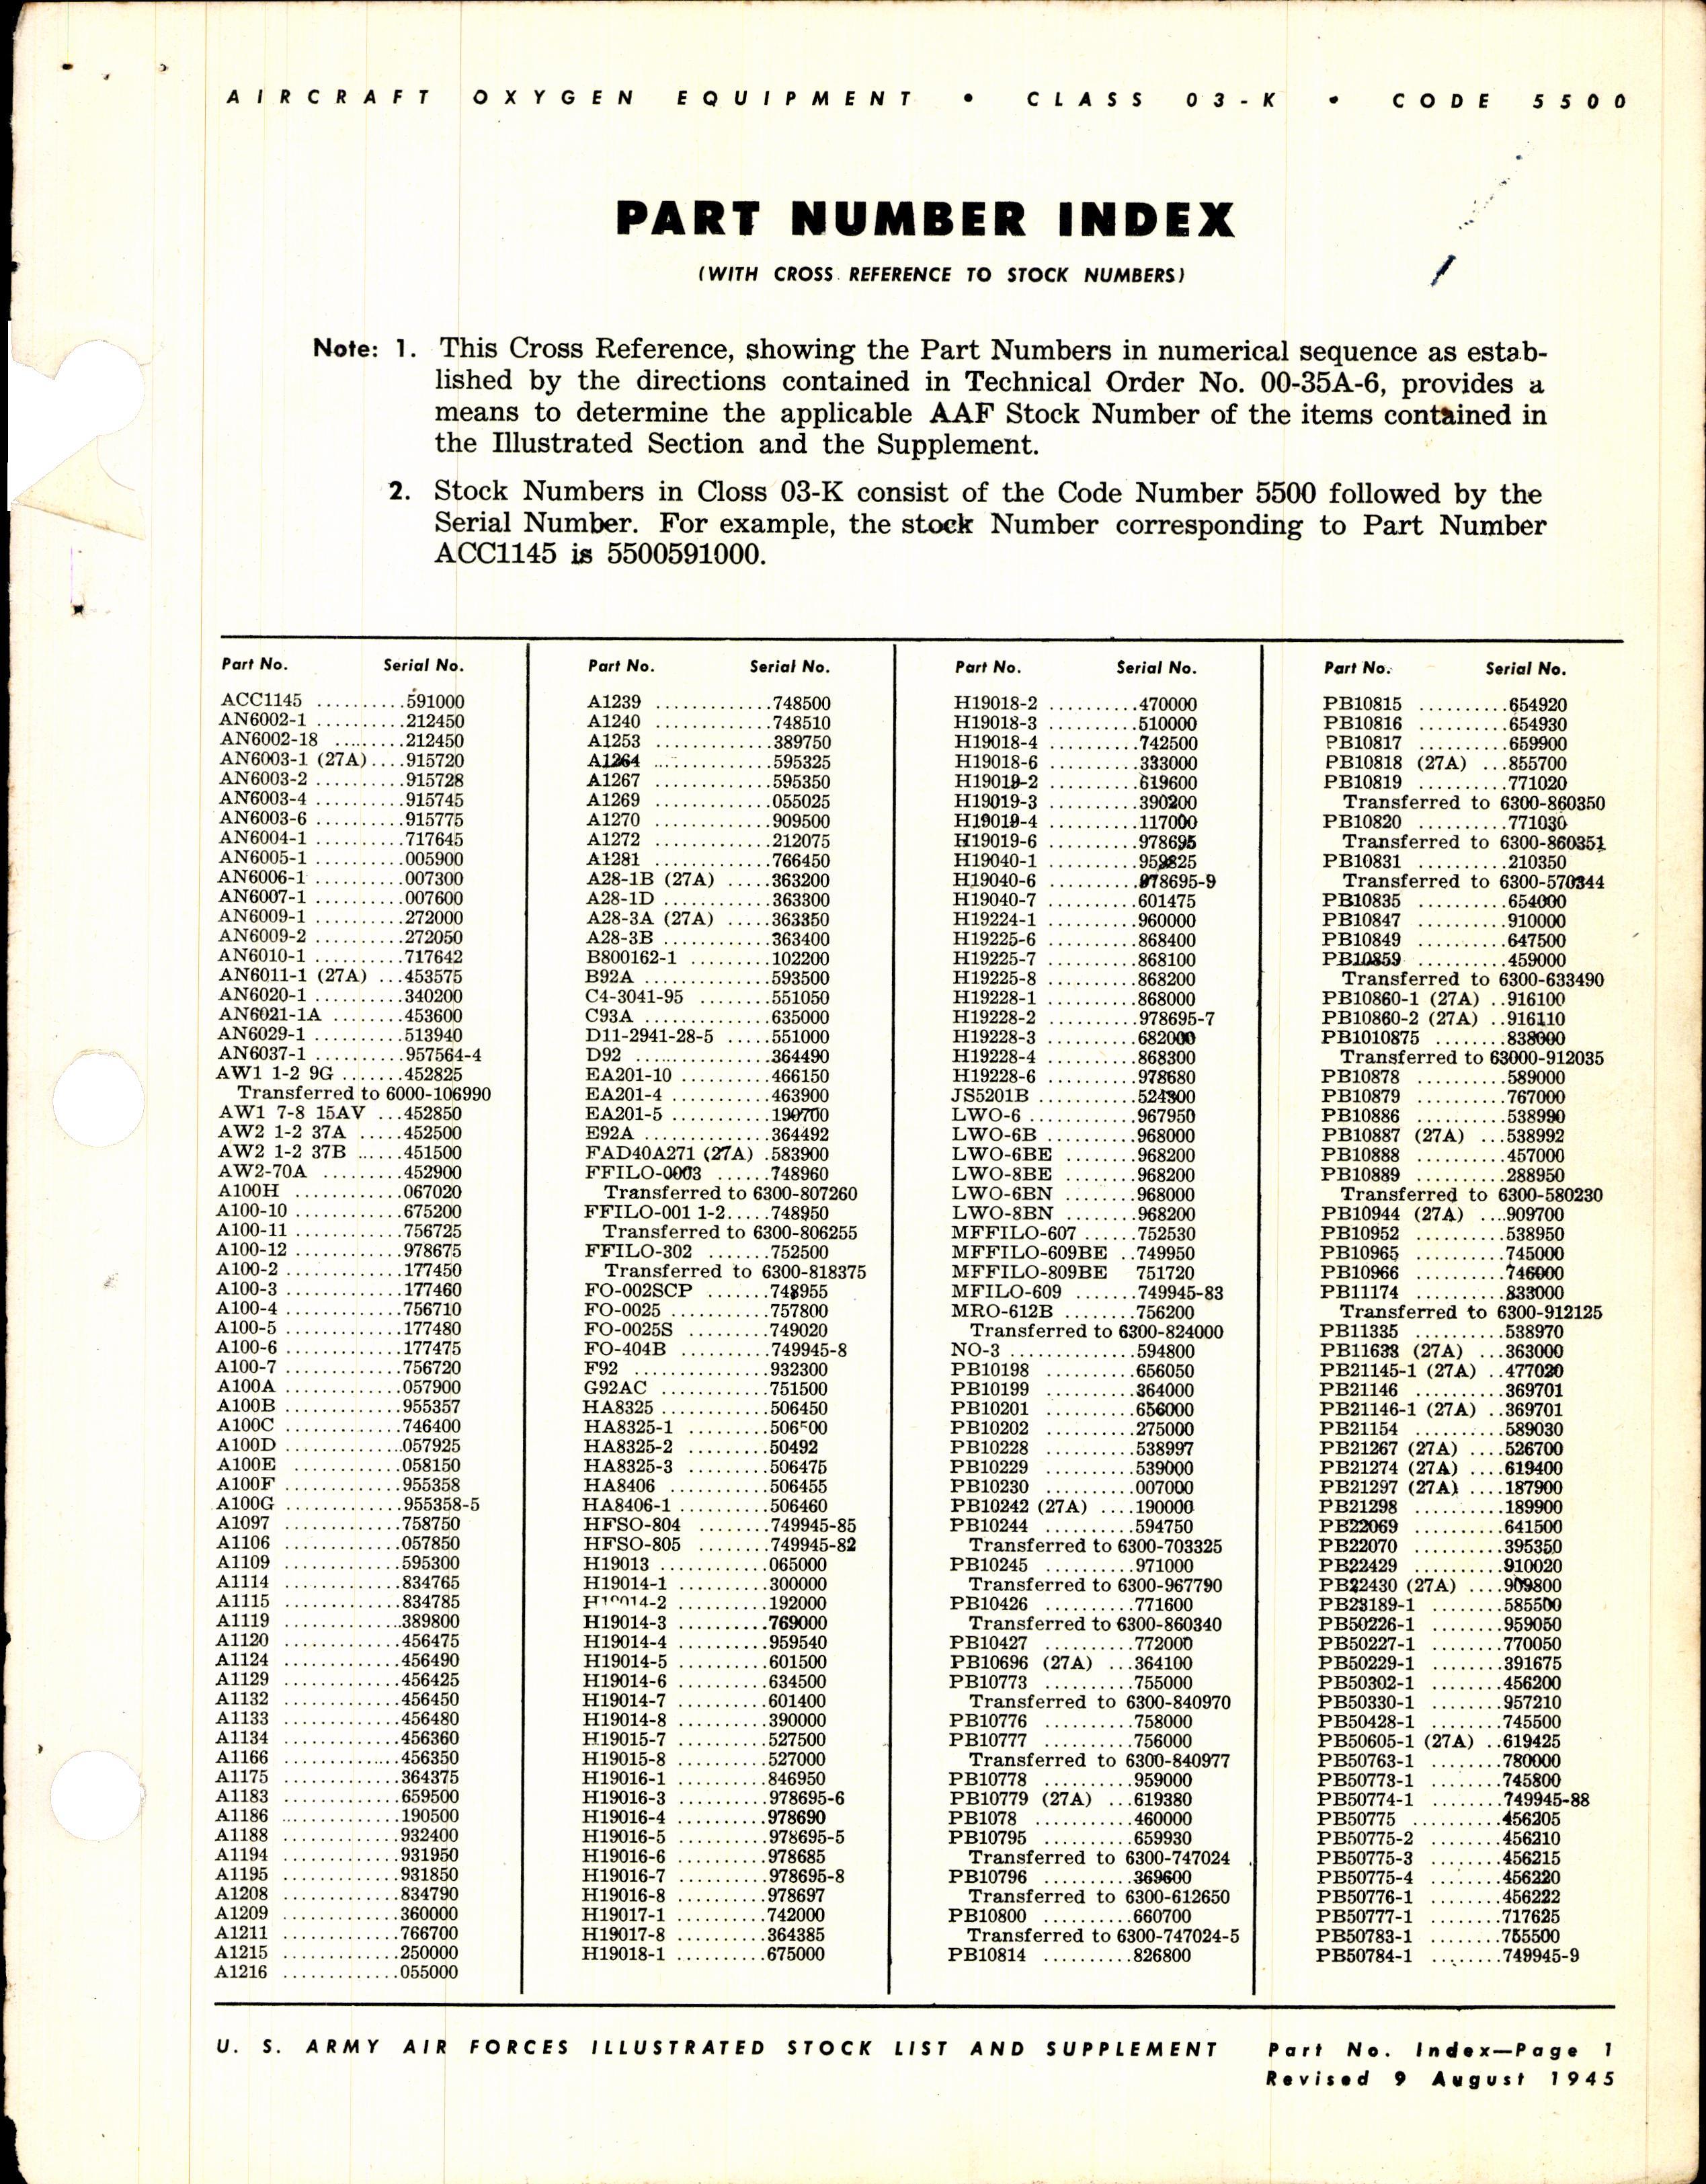 Sample page 3 from AirCorps Library document: Illustrated Stock List for Aircraft Oxygen Equipment